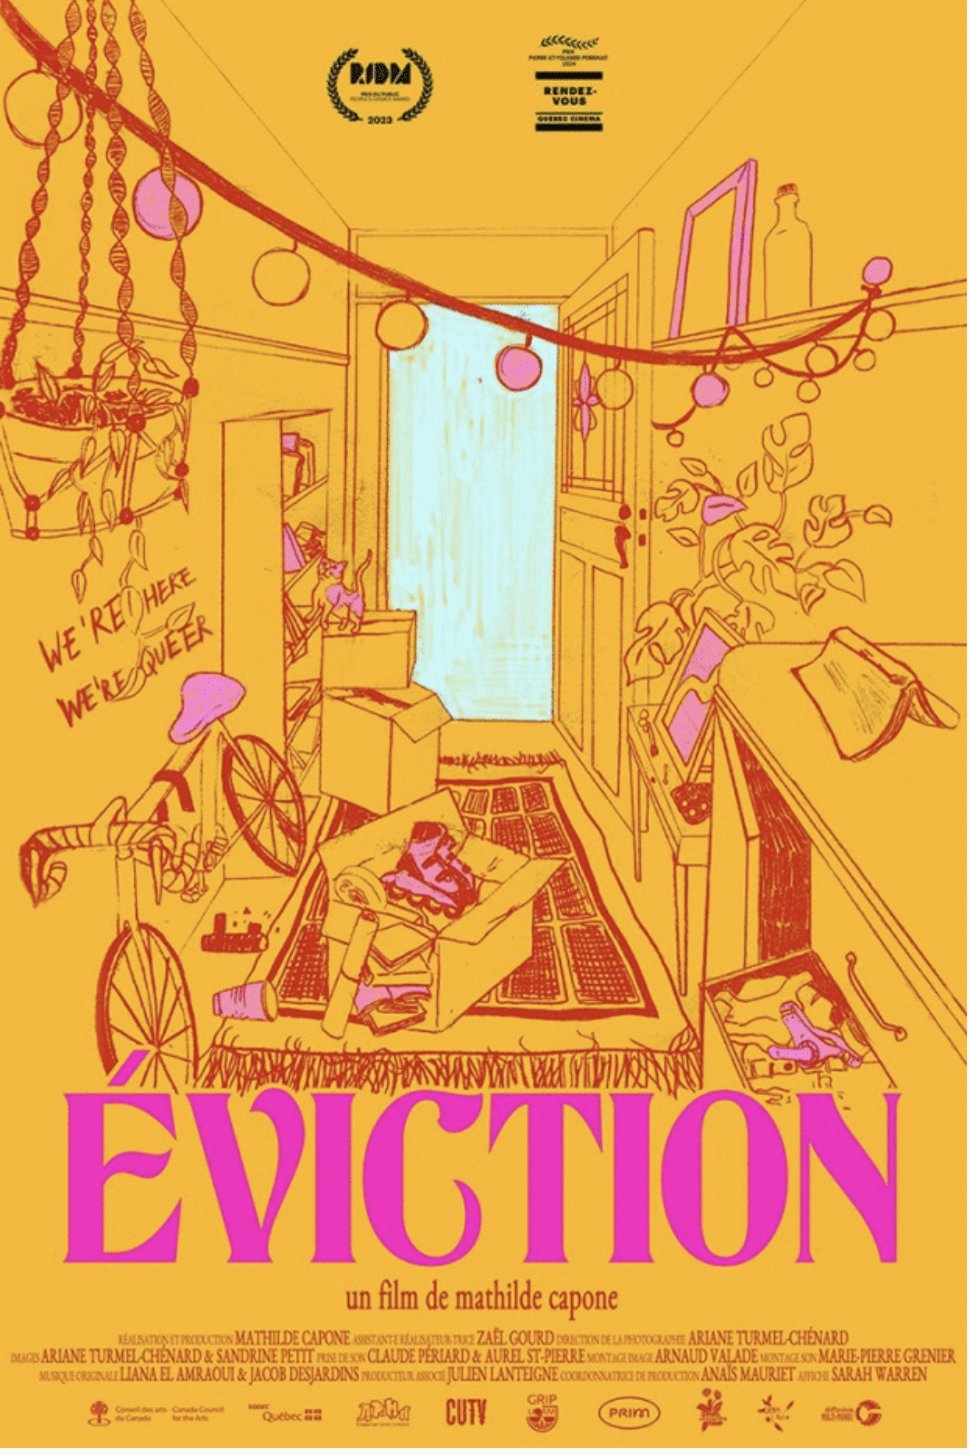 Poster of the movie Éviction